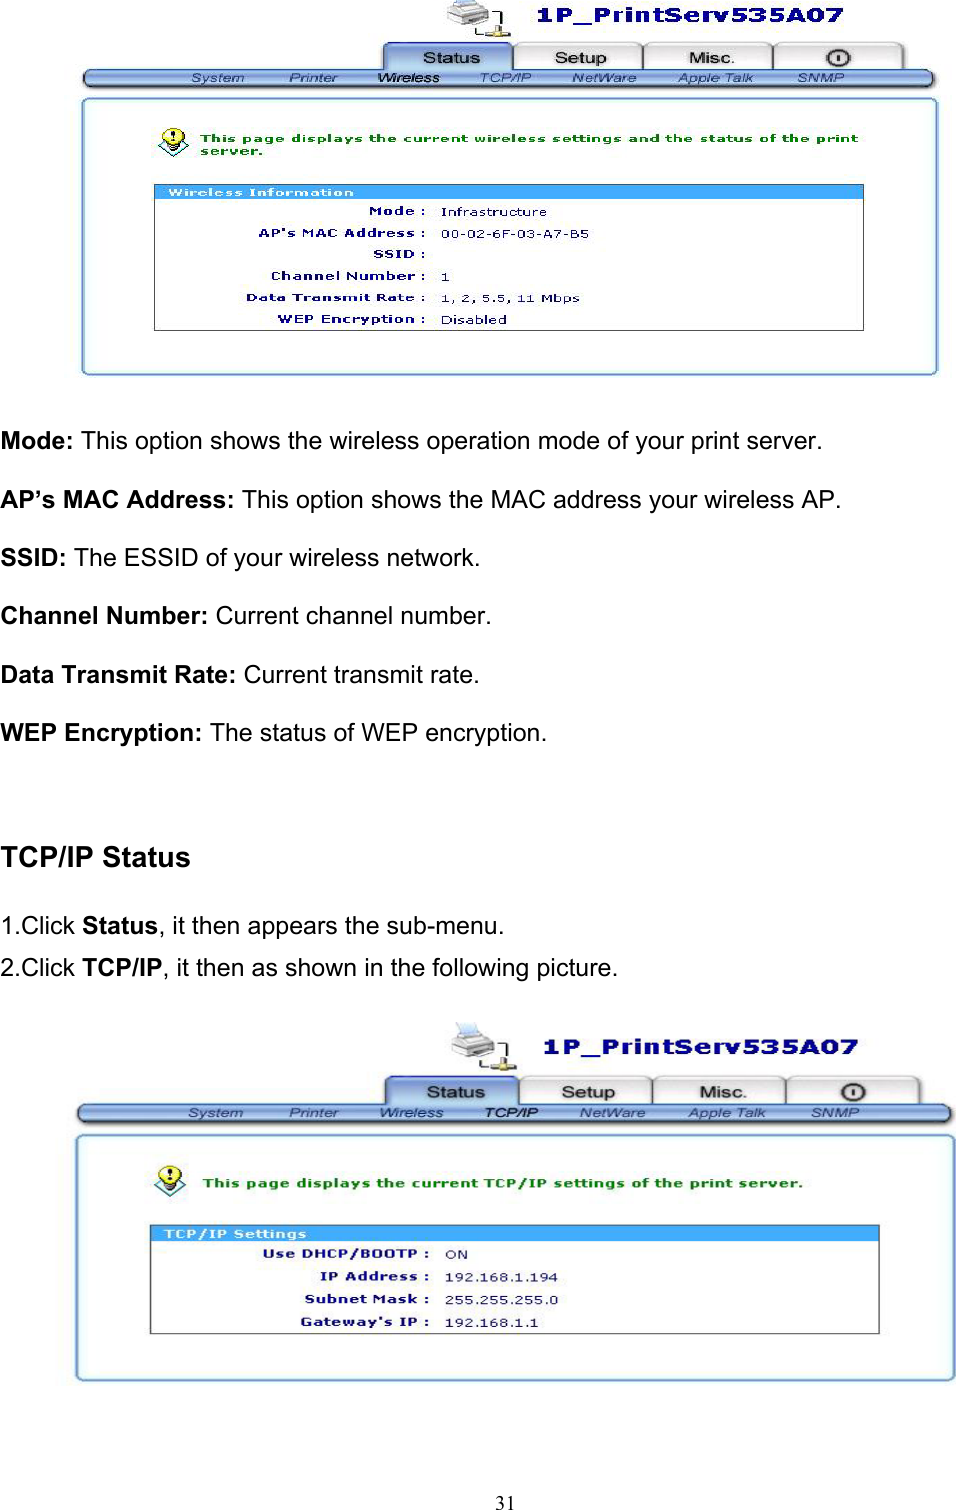                                                                                             31    Mode: This option shows the wireless operation mode of your print server.  AP’s MAC Address: This option shows the MAC address your wireless AP.  SSID: The ESSID of your wireless network.  Channel Number: Current channel number.  Data Transmit Rate: Current transmit rate.    WEP Encryption: The status of WEP encryption.    TCP/IP Status  1.Click Status, it then appears the sub-menu. 2.Click TCP/IP, it then as shown in the following picture.   